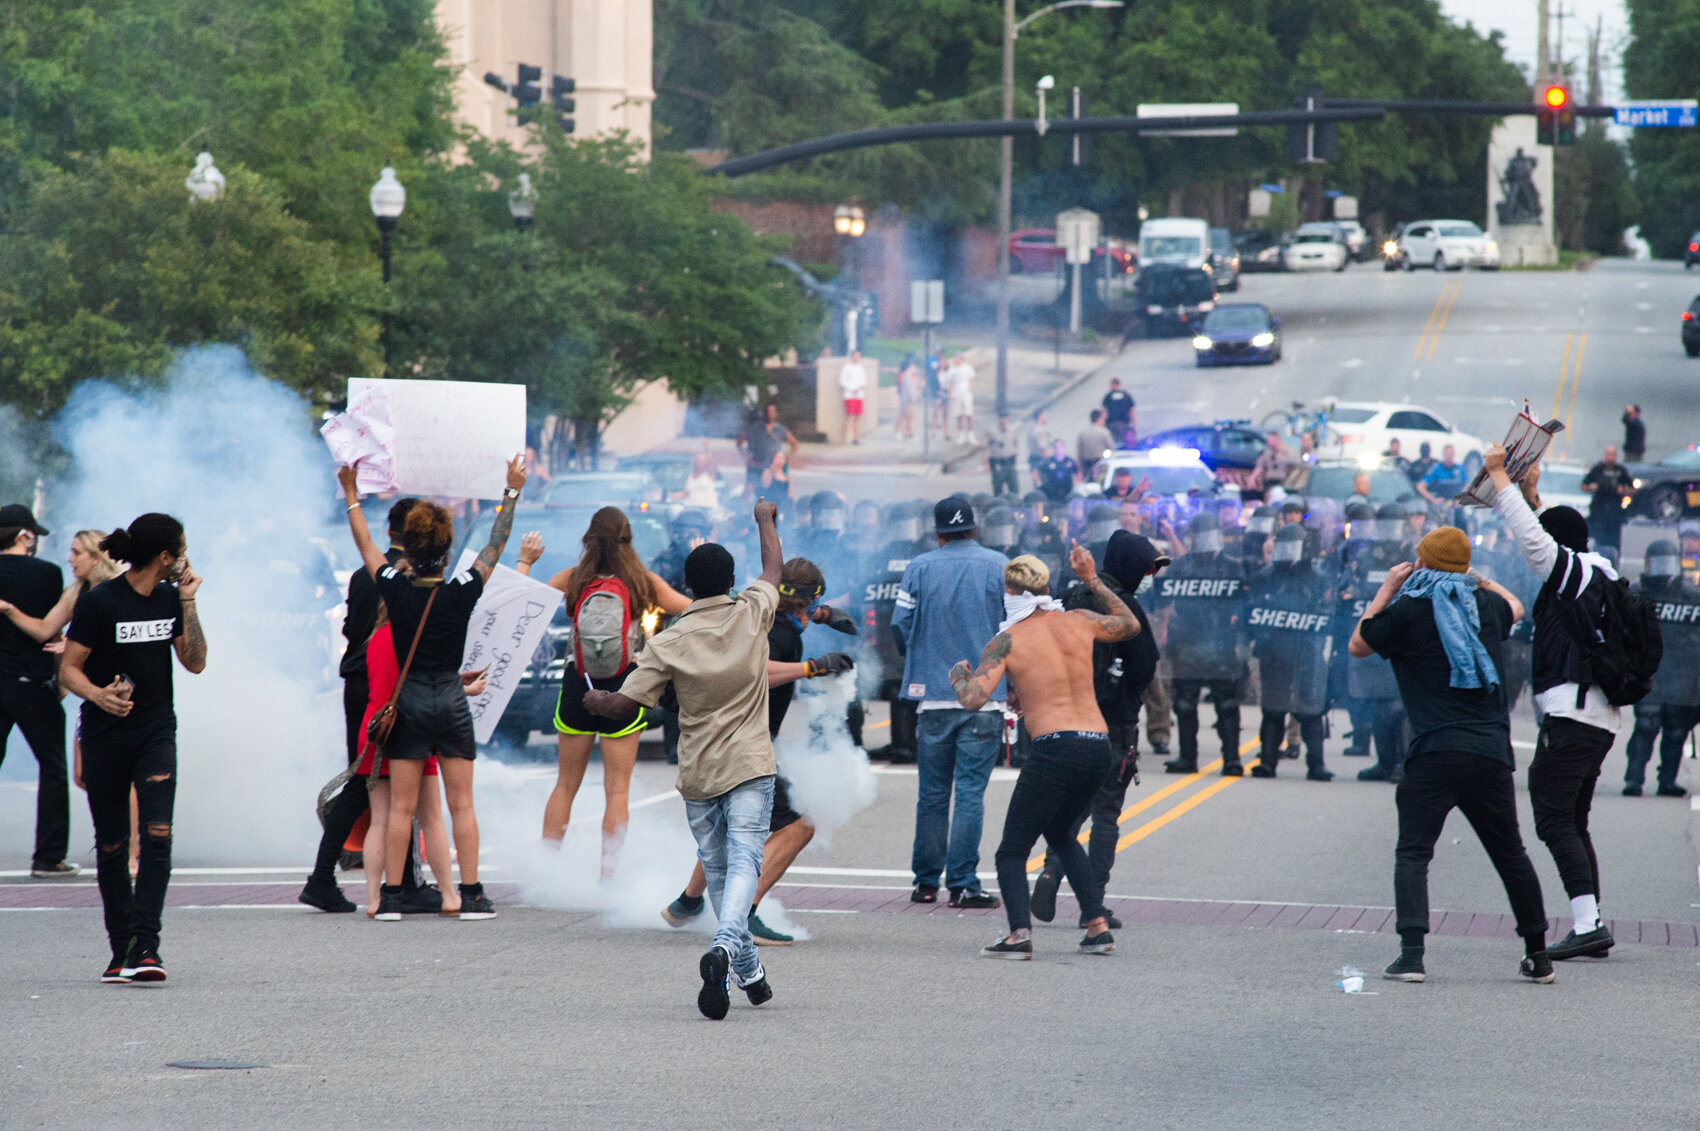  A protestor throws a tear gas canister back towards the line of sheriff’s deputies wearing riot gear, May 30, 2020. Most of the crowd of protestors outside City Hall had dispersed after the first volley of tear gas canisters fired by the deputies. (